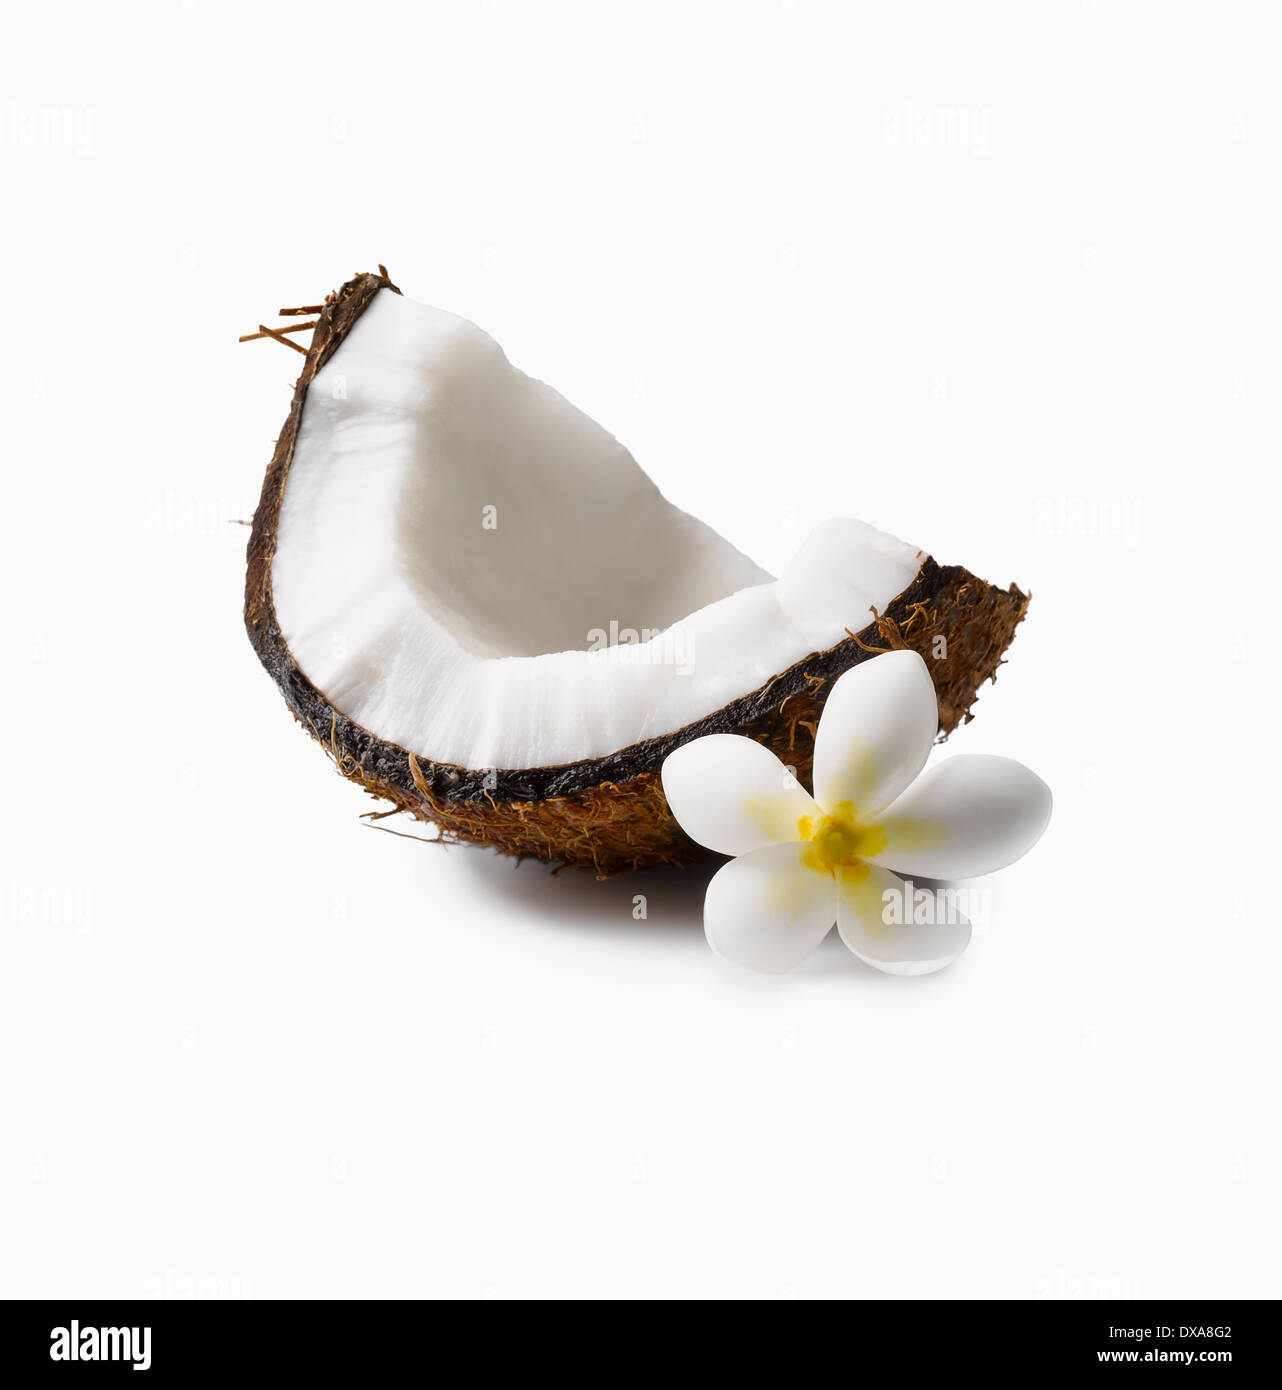 Coconut Cocos nucifera segment with shell and a Tahitian gardenis or Tiare flower Gardenia tiatensis together these are the Stock Photo